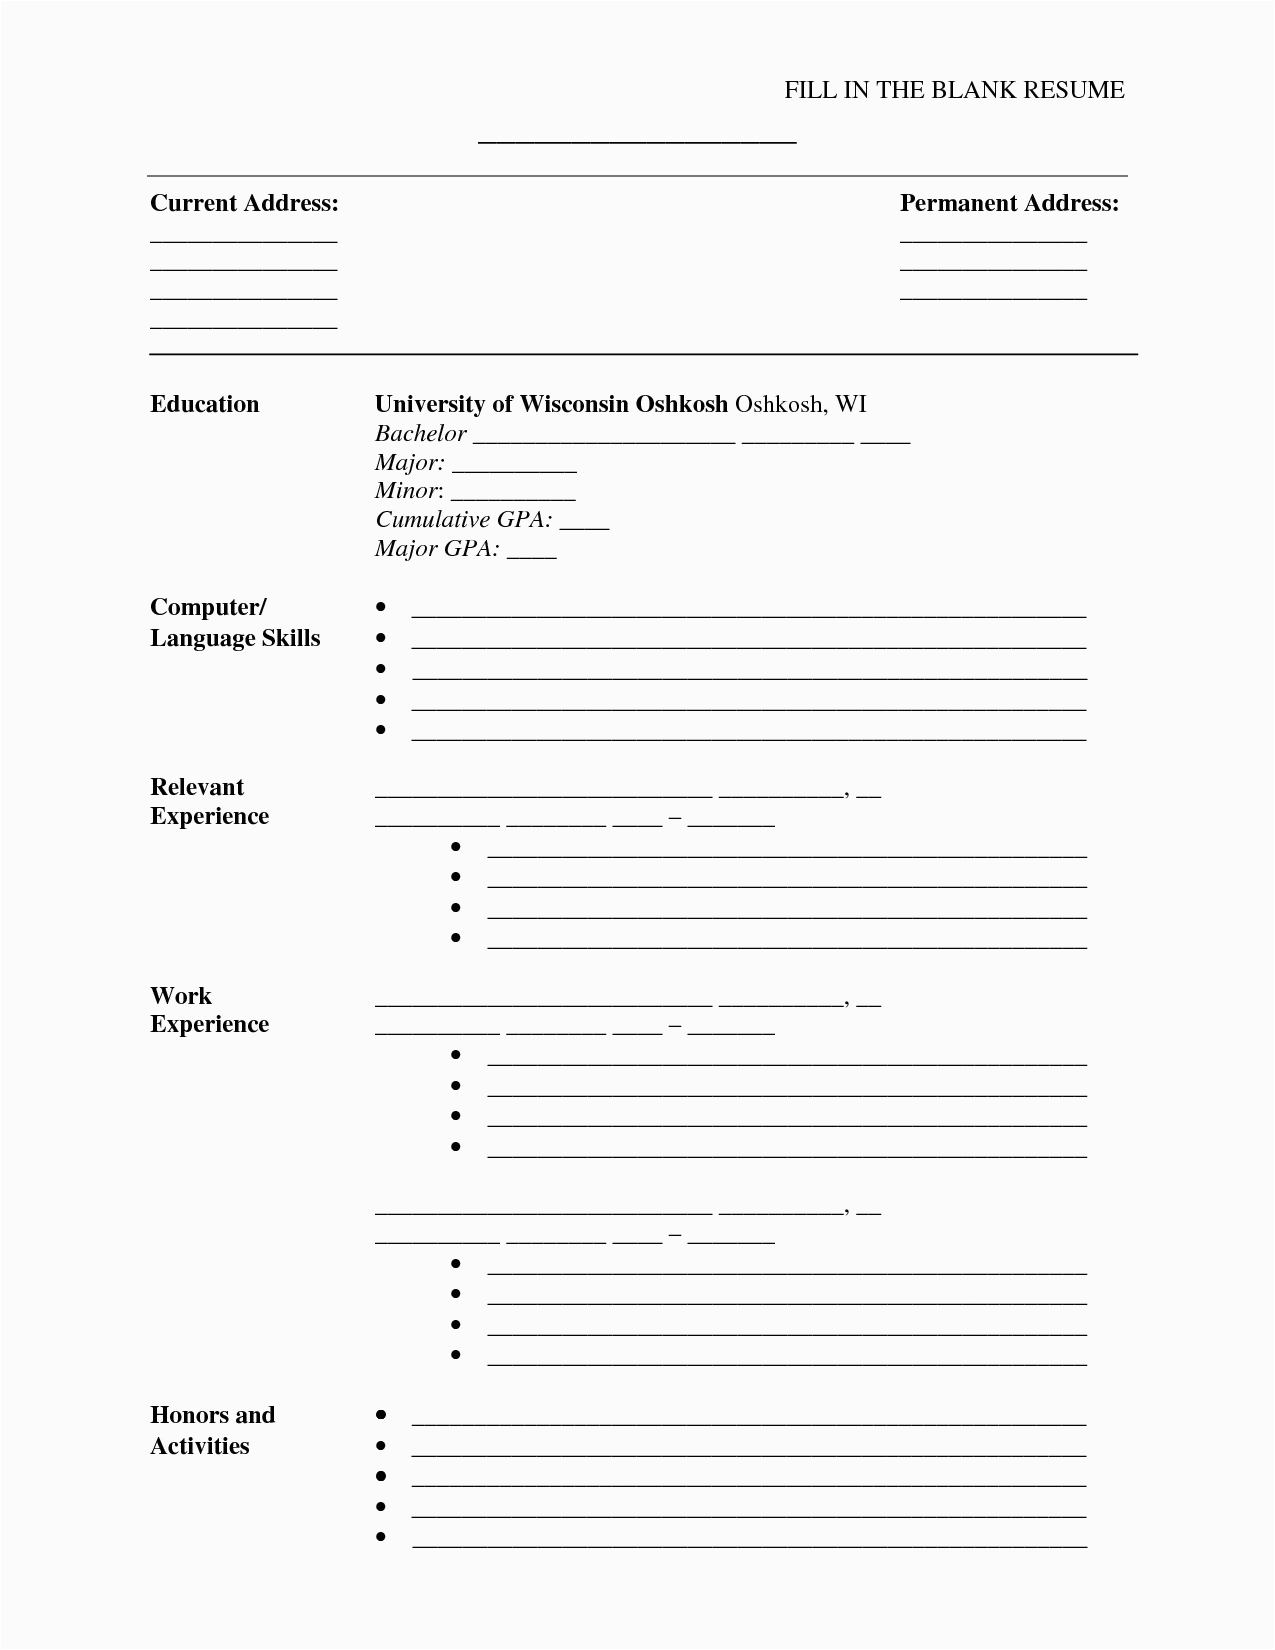 Fill In the Blank Functional Resume Template Fill In the Blank Resume Pdf Umecareer